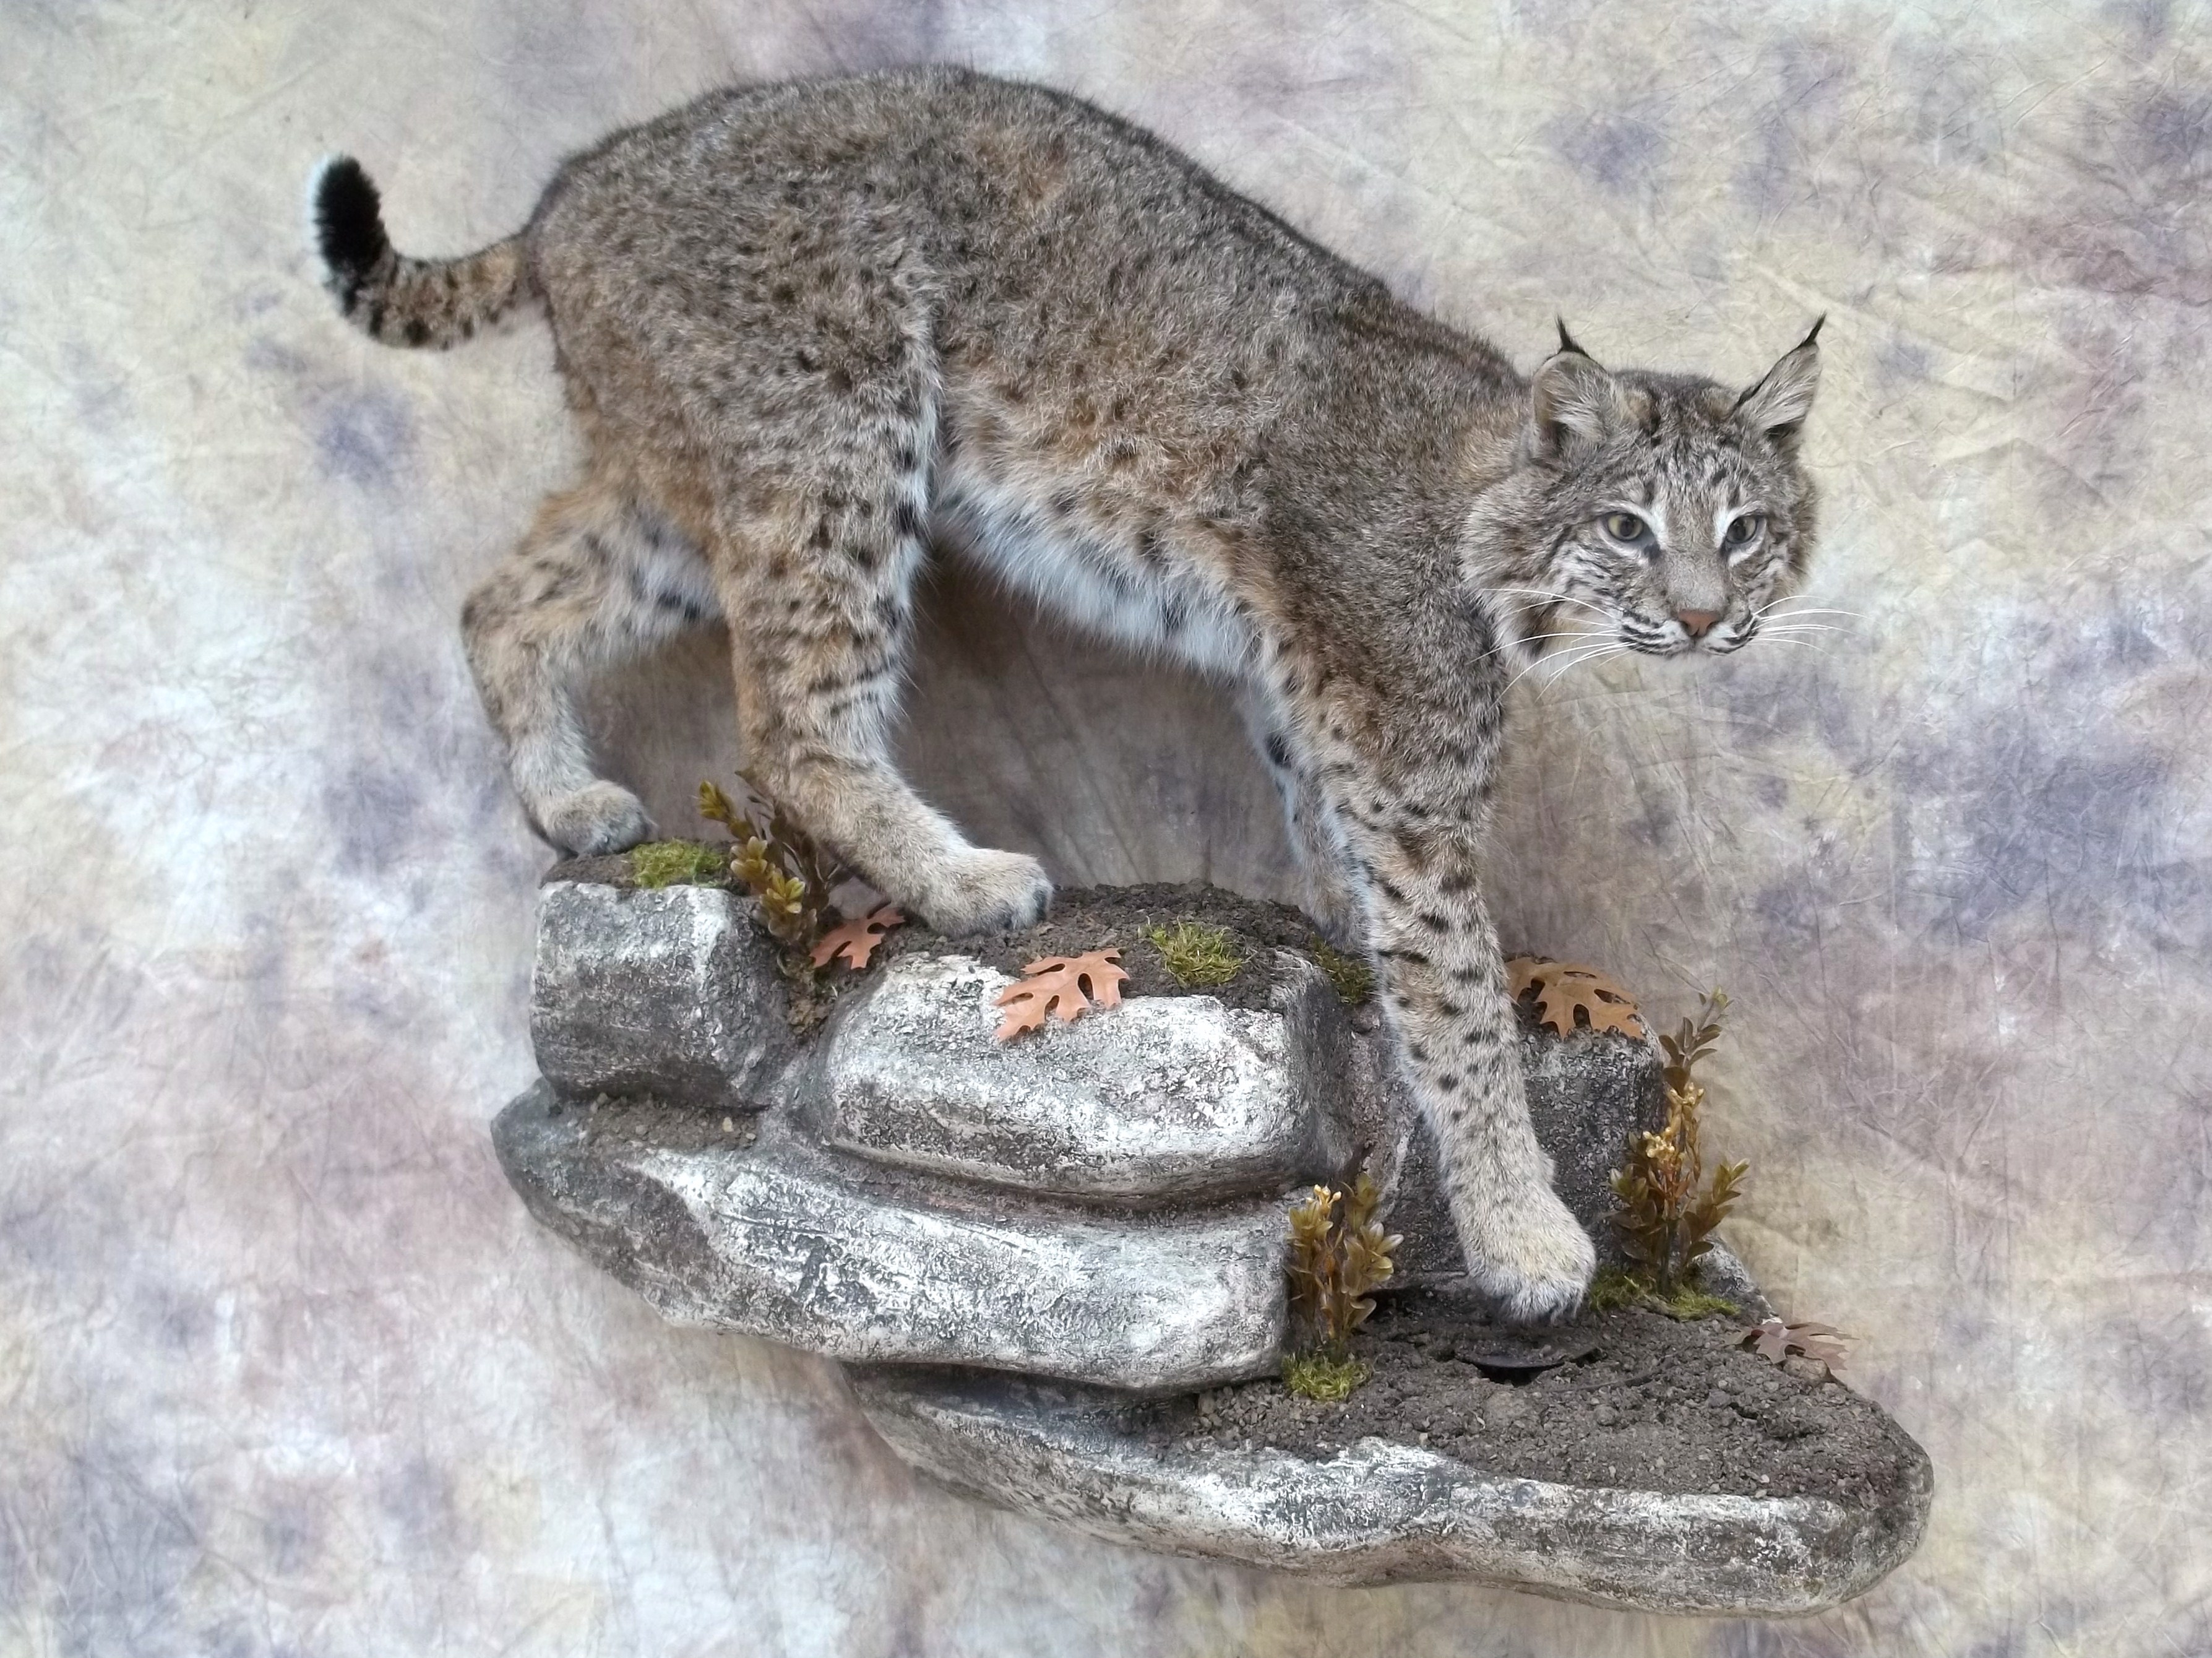 bobcat taxidermy mount coming down a rock